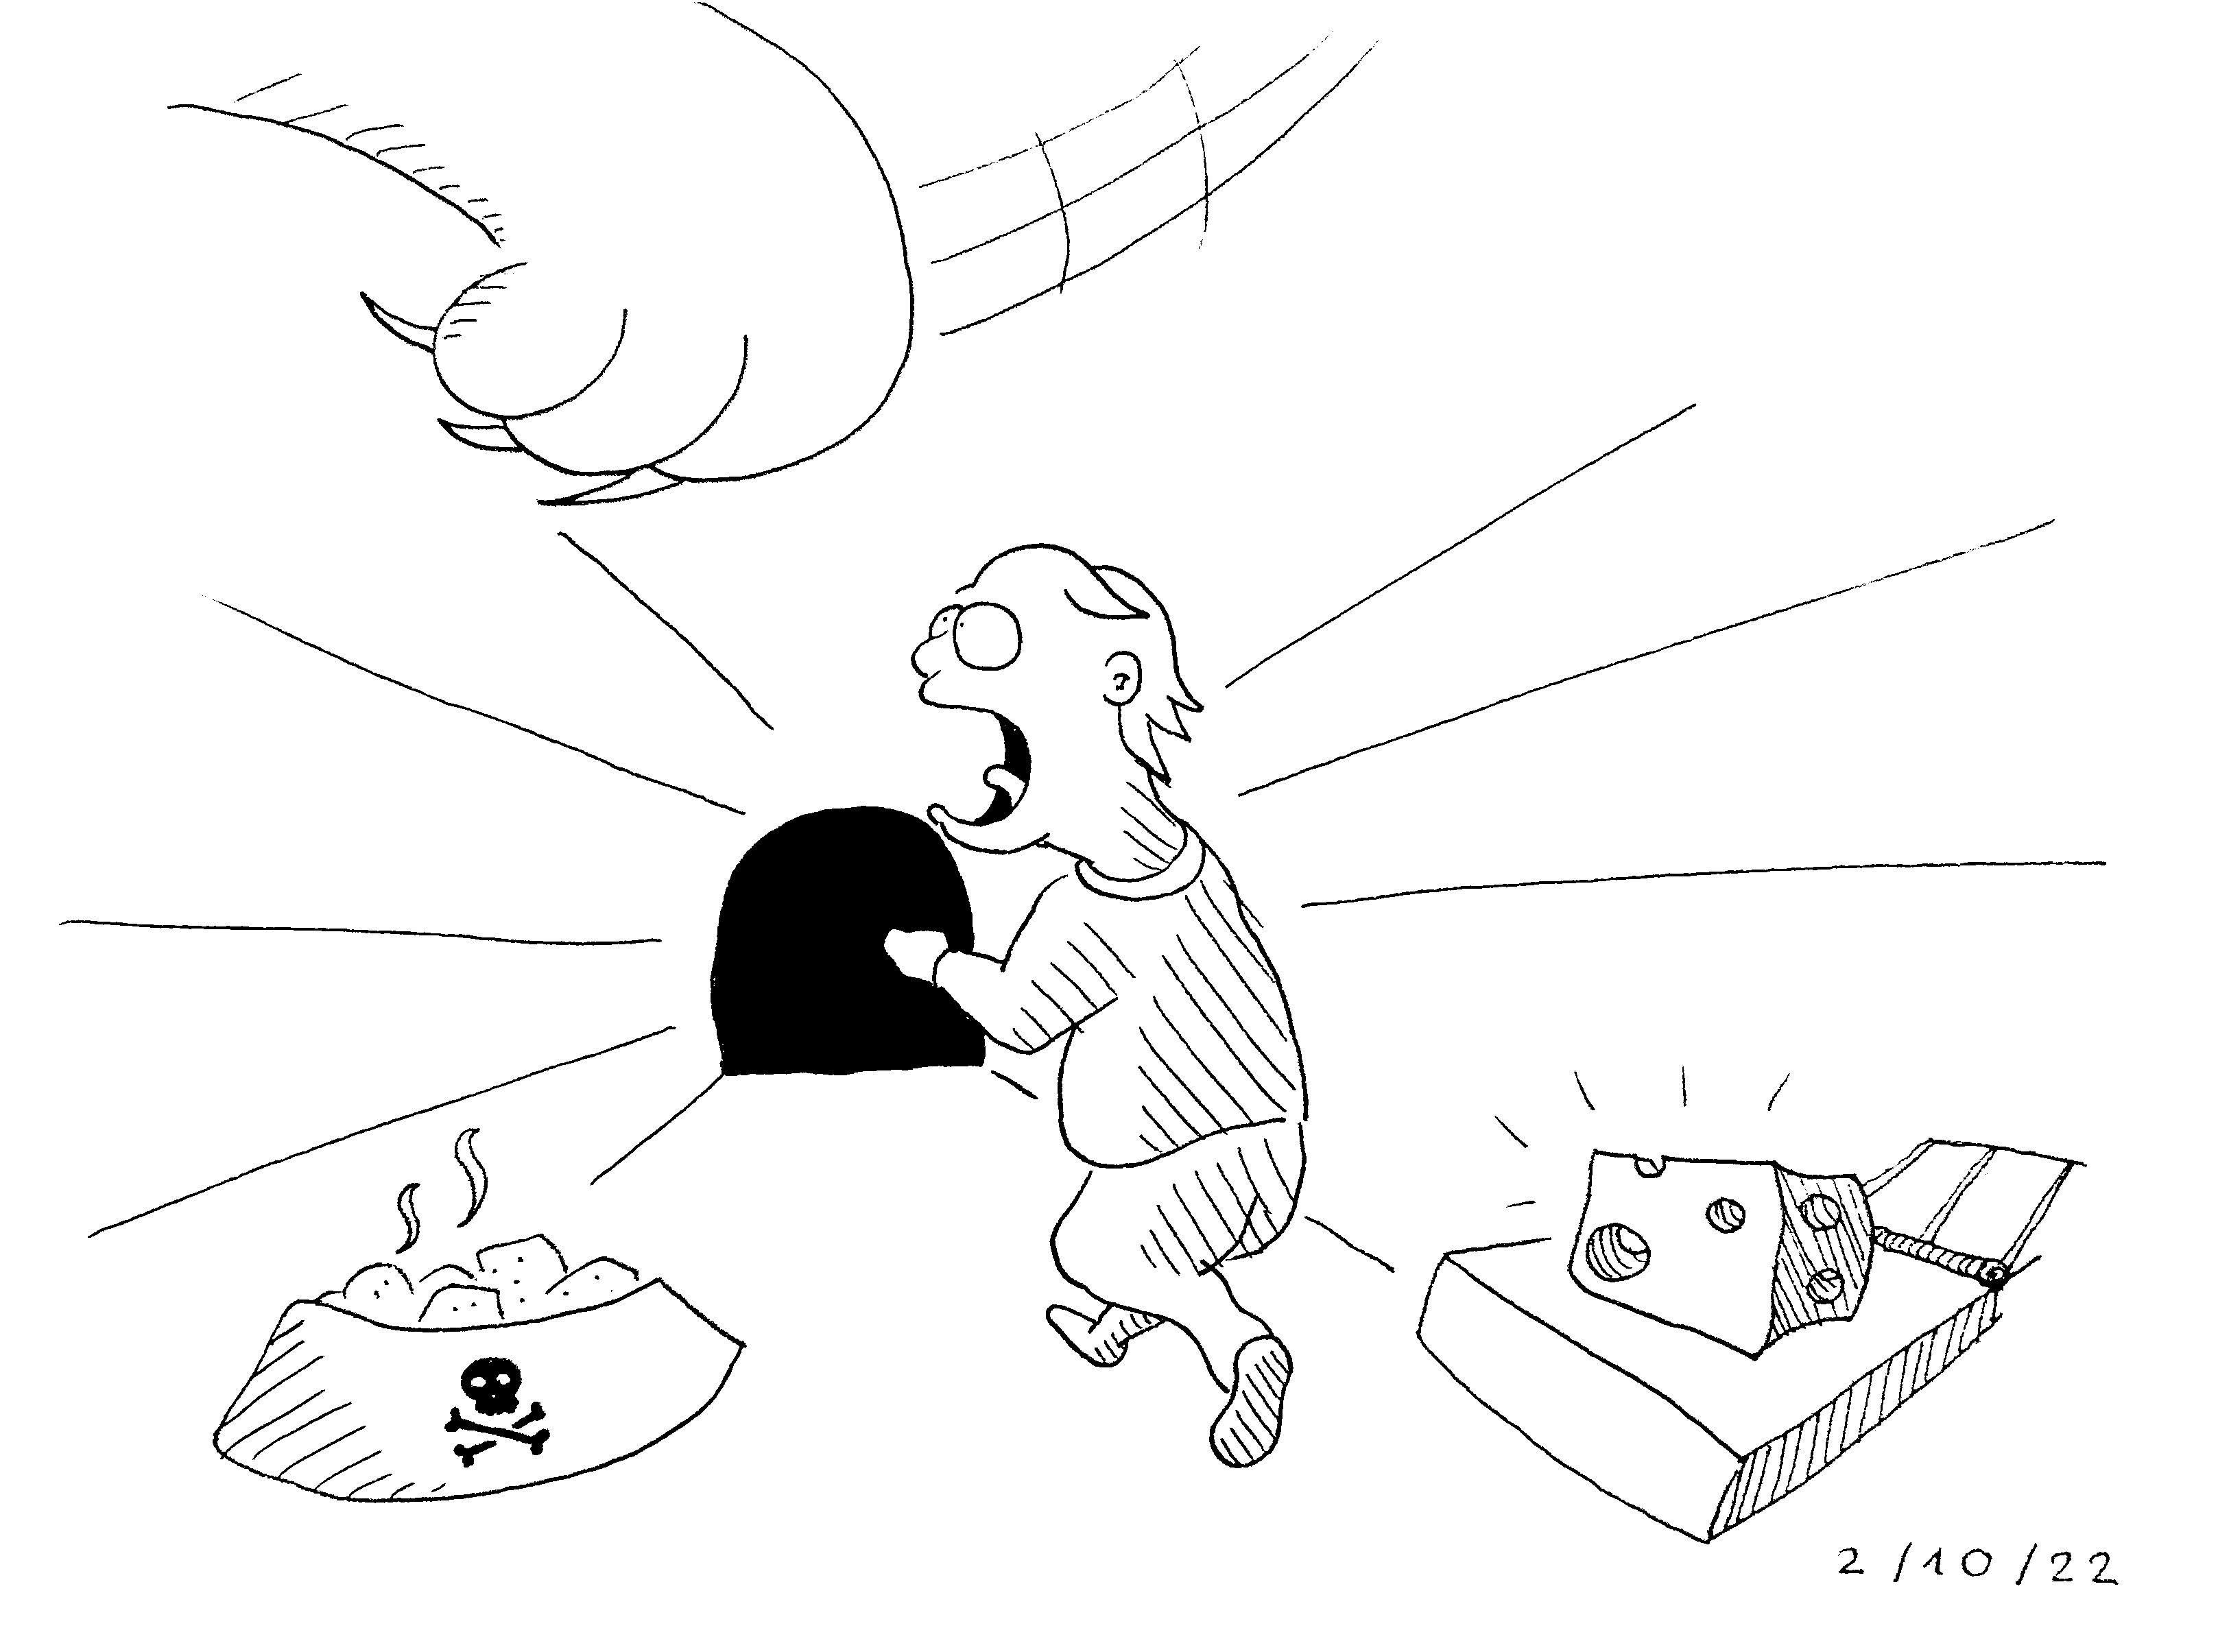 Inktober 2022: DAY 2 - SCURRY